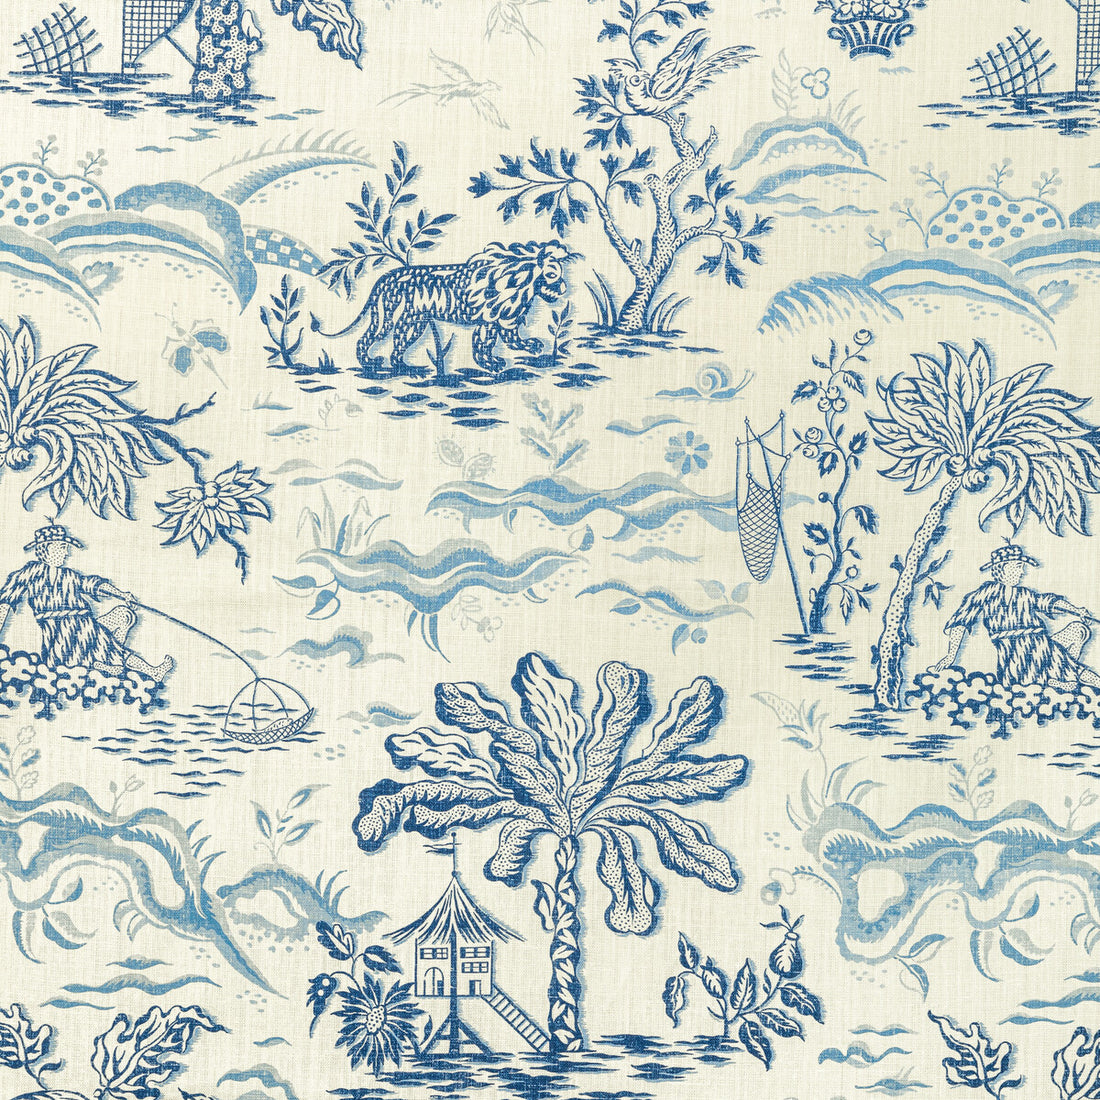 Valensole Print fabric in navy/sky color - pattern 8022101.55.0 - by Brunschwig &amp; Fils in the Manoir collection